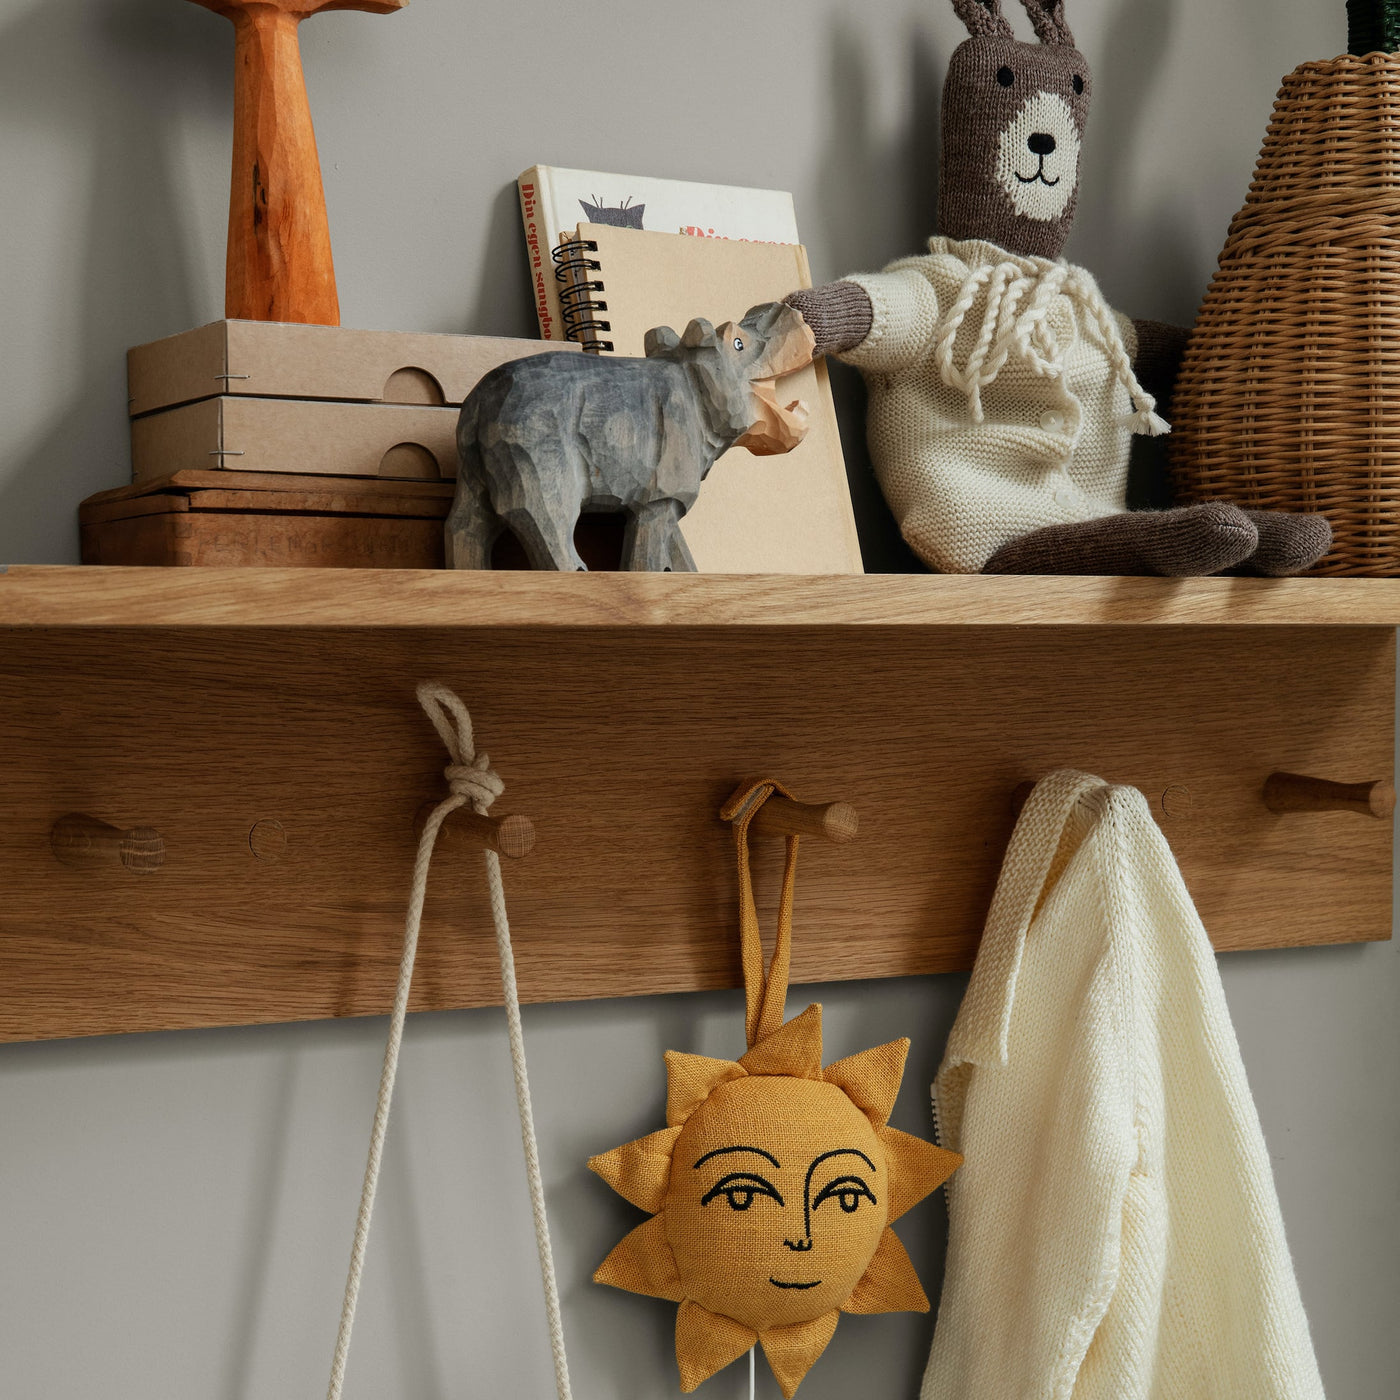 Ferm Living Place Rack medium. Free UK delivery at someday designs #size_medium